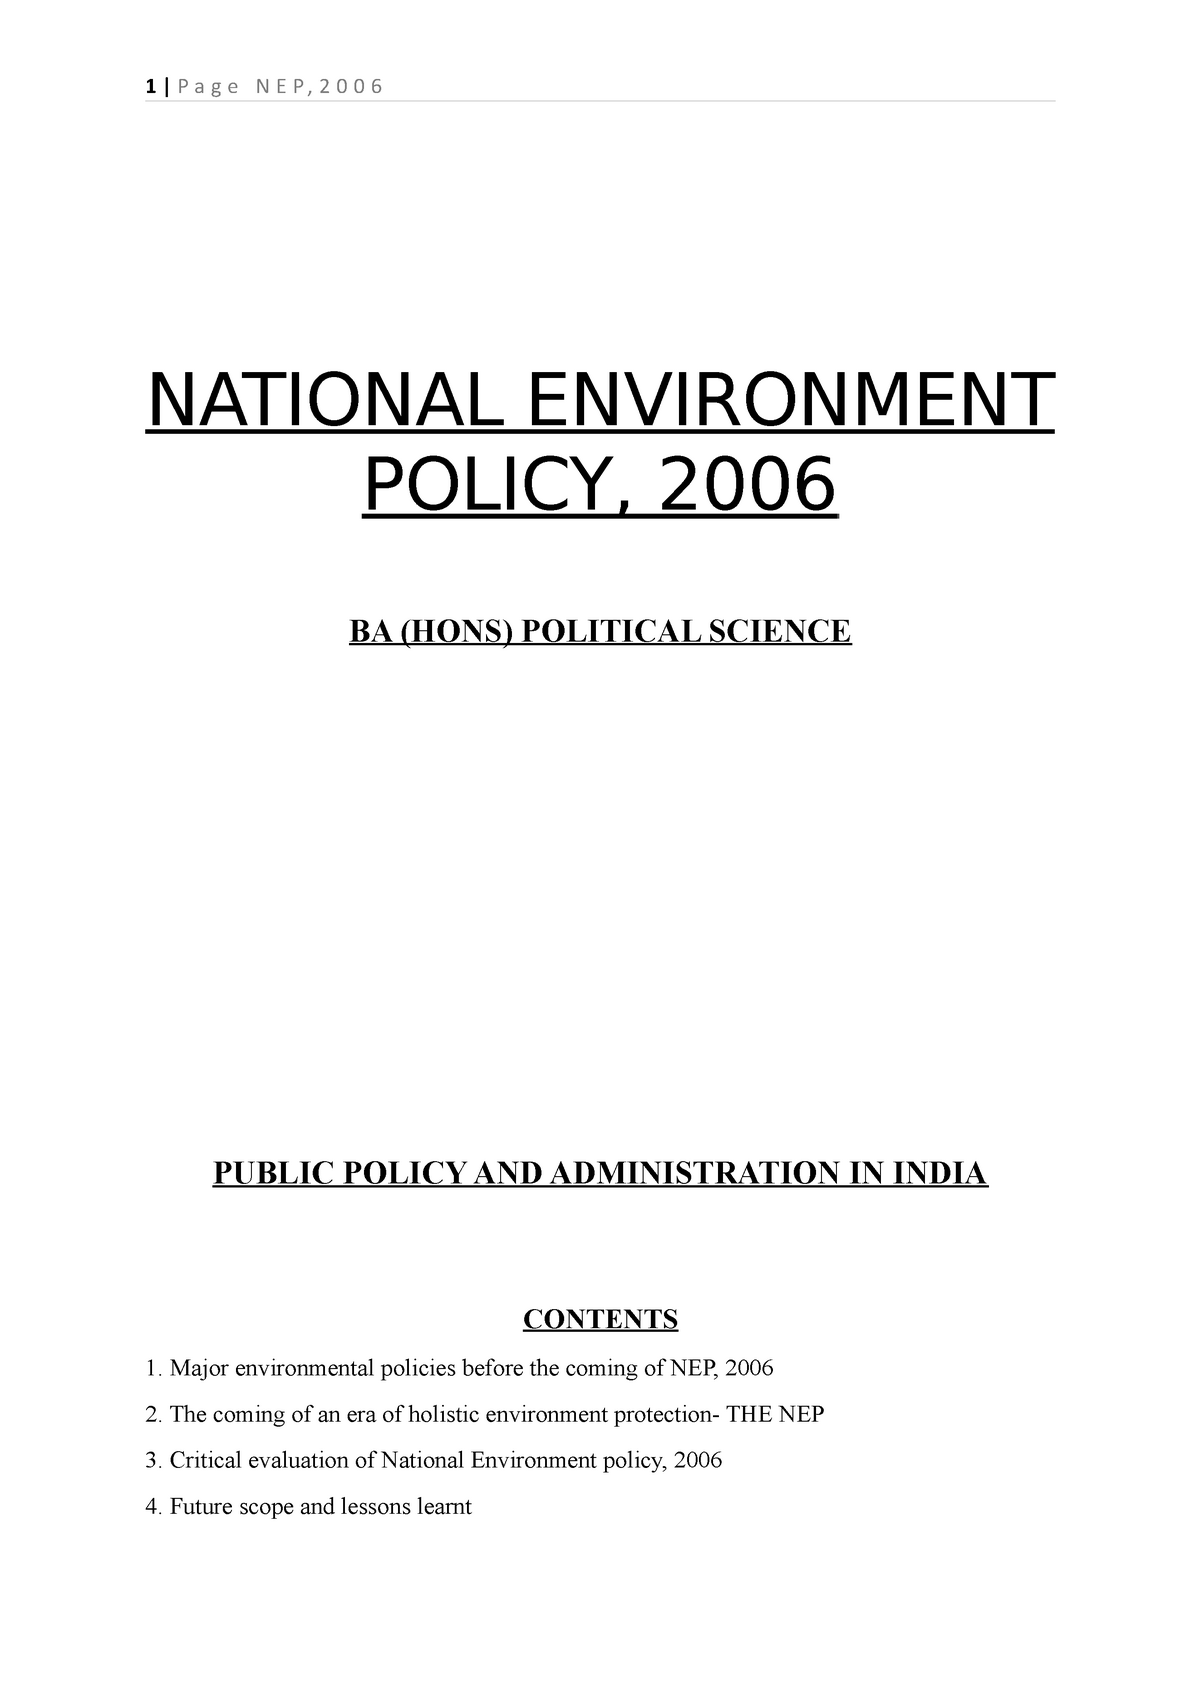 National envrionment policy, 2006 - NATIONAL ENVIRONMENT POLICY, 2006 ...